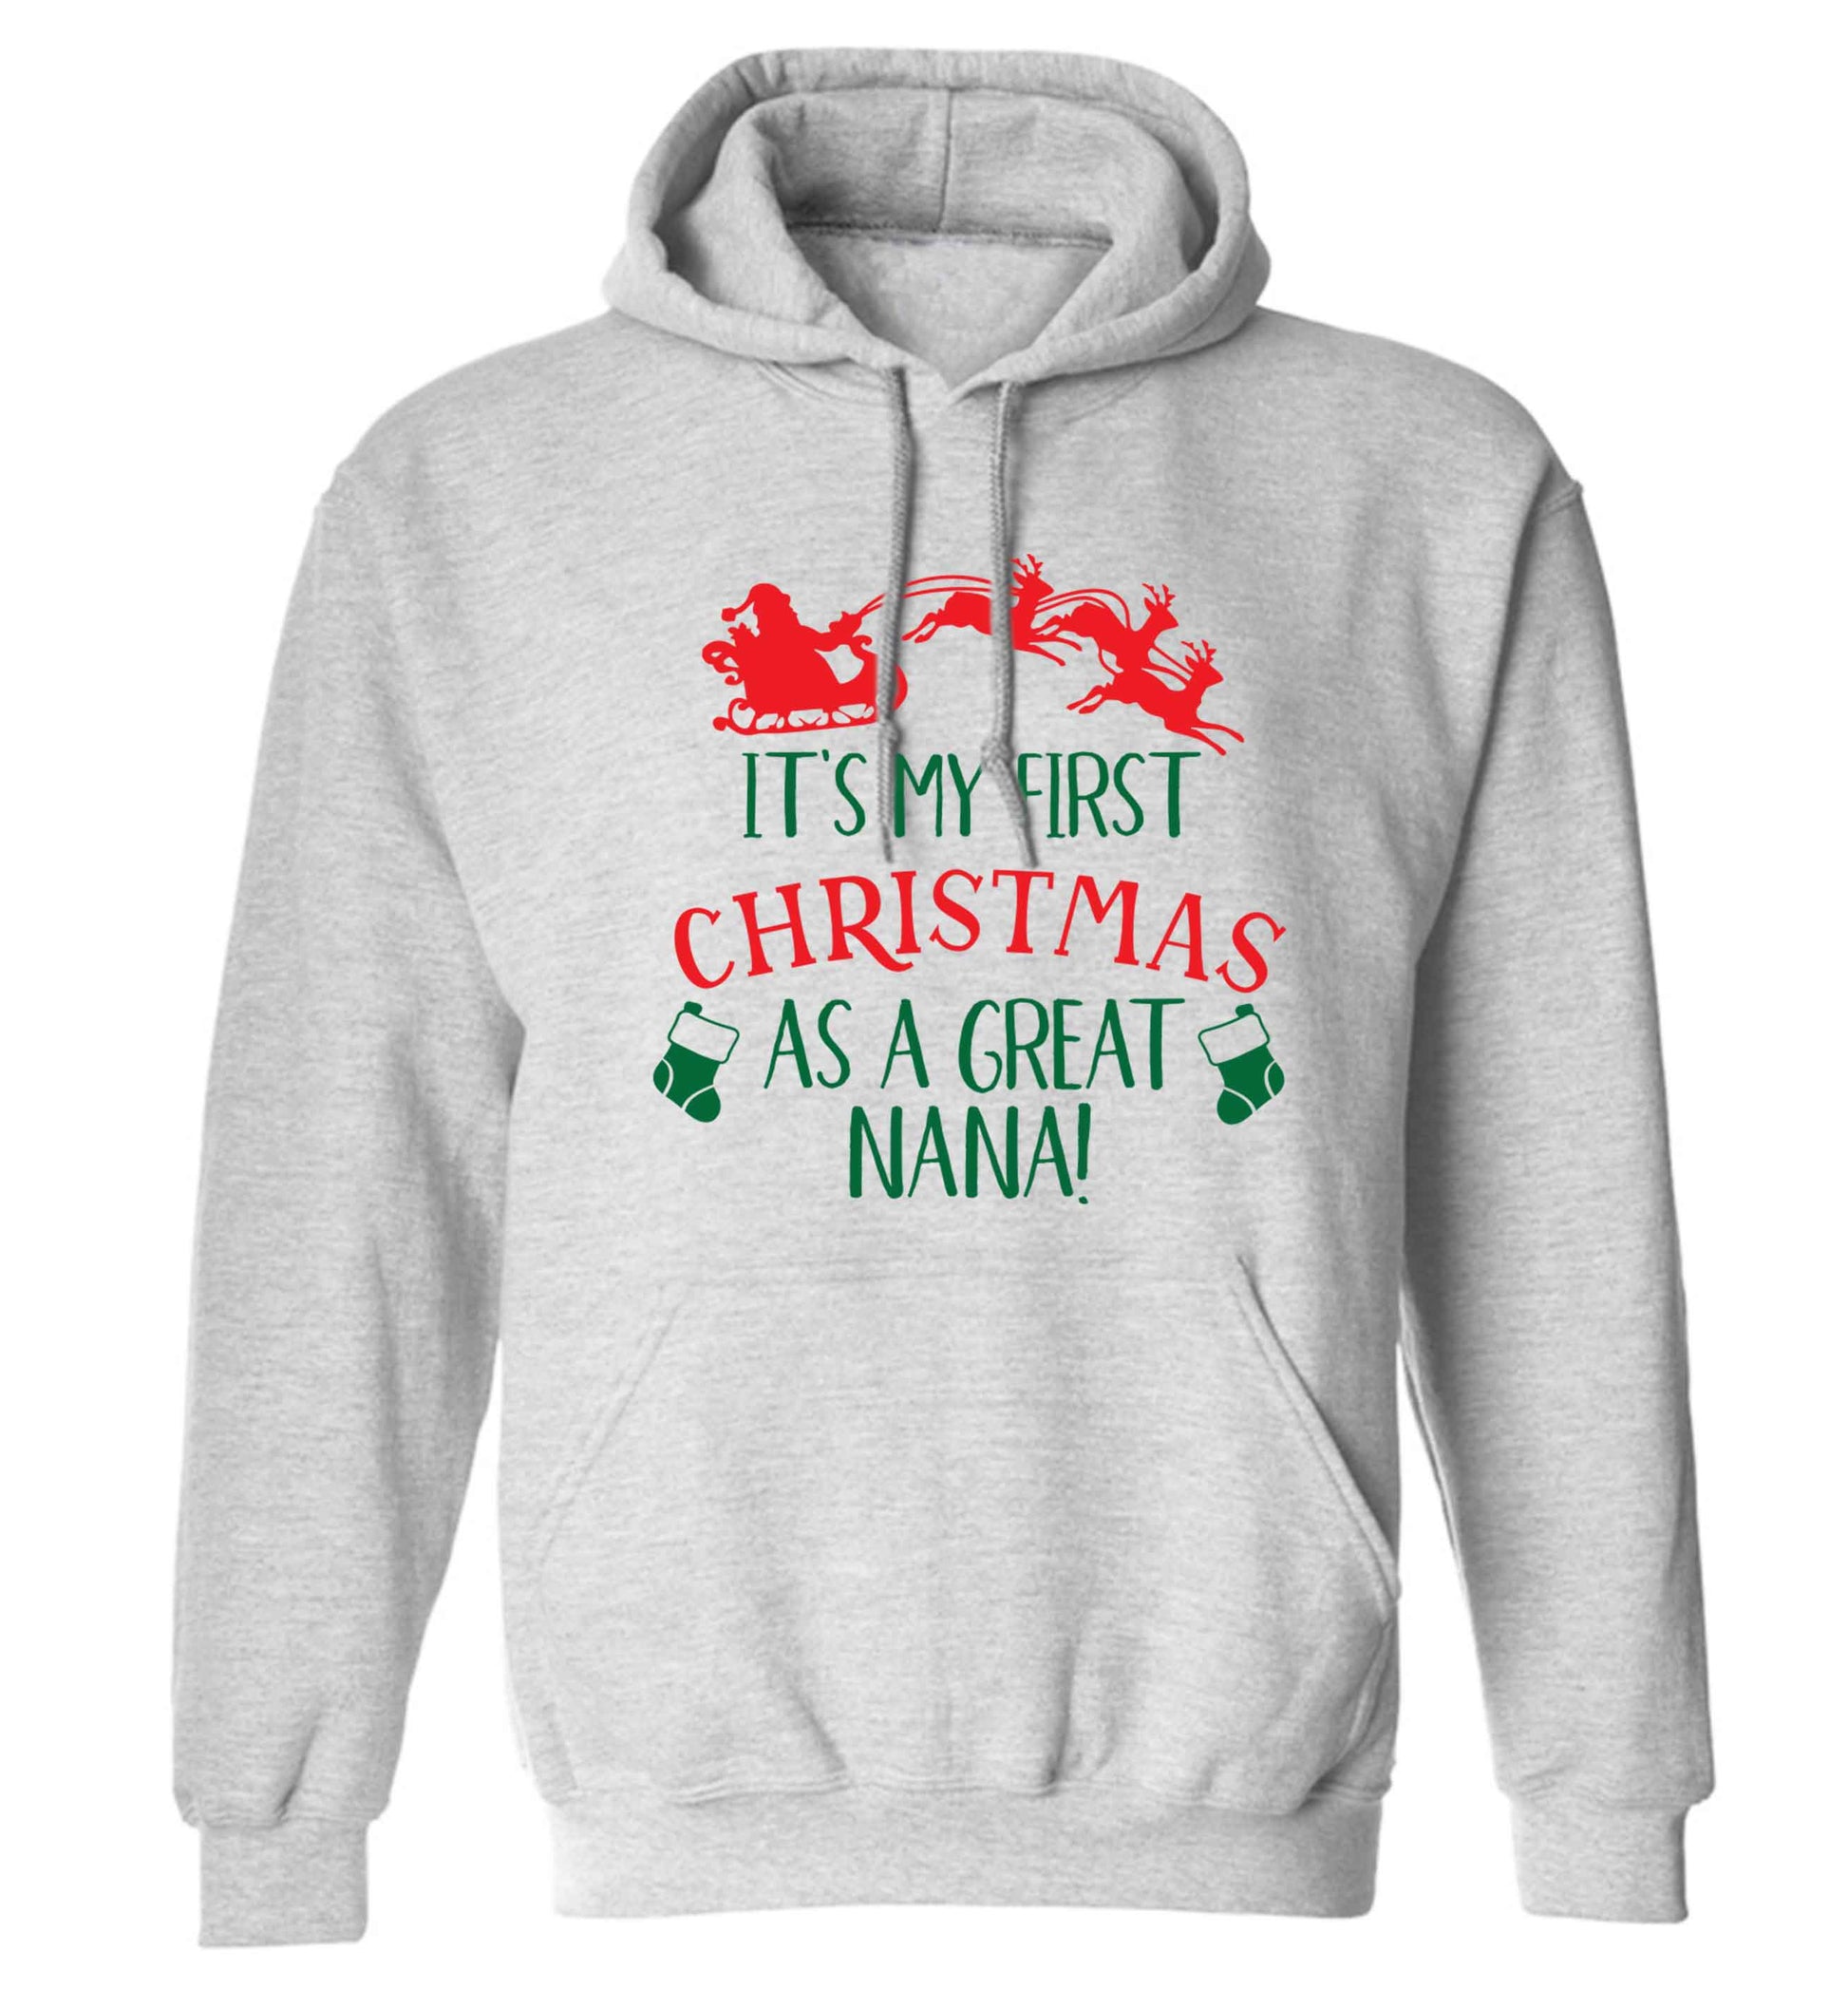 It's my first Christmas as a great nana! adults unisex grey hoodie 2XL